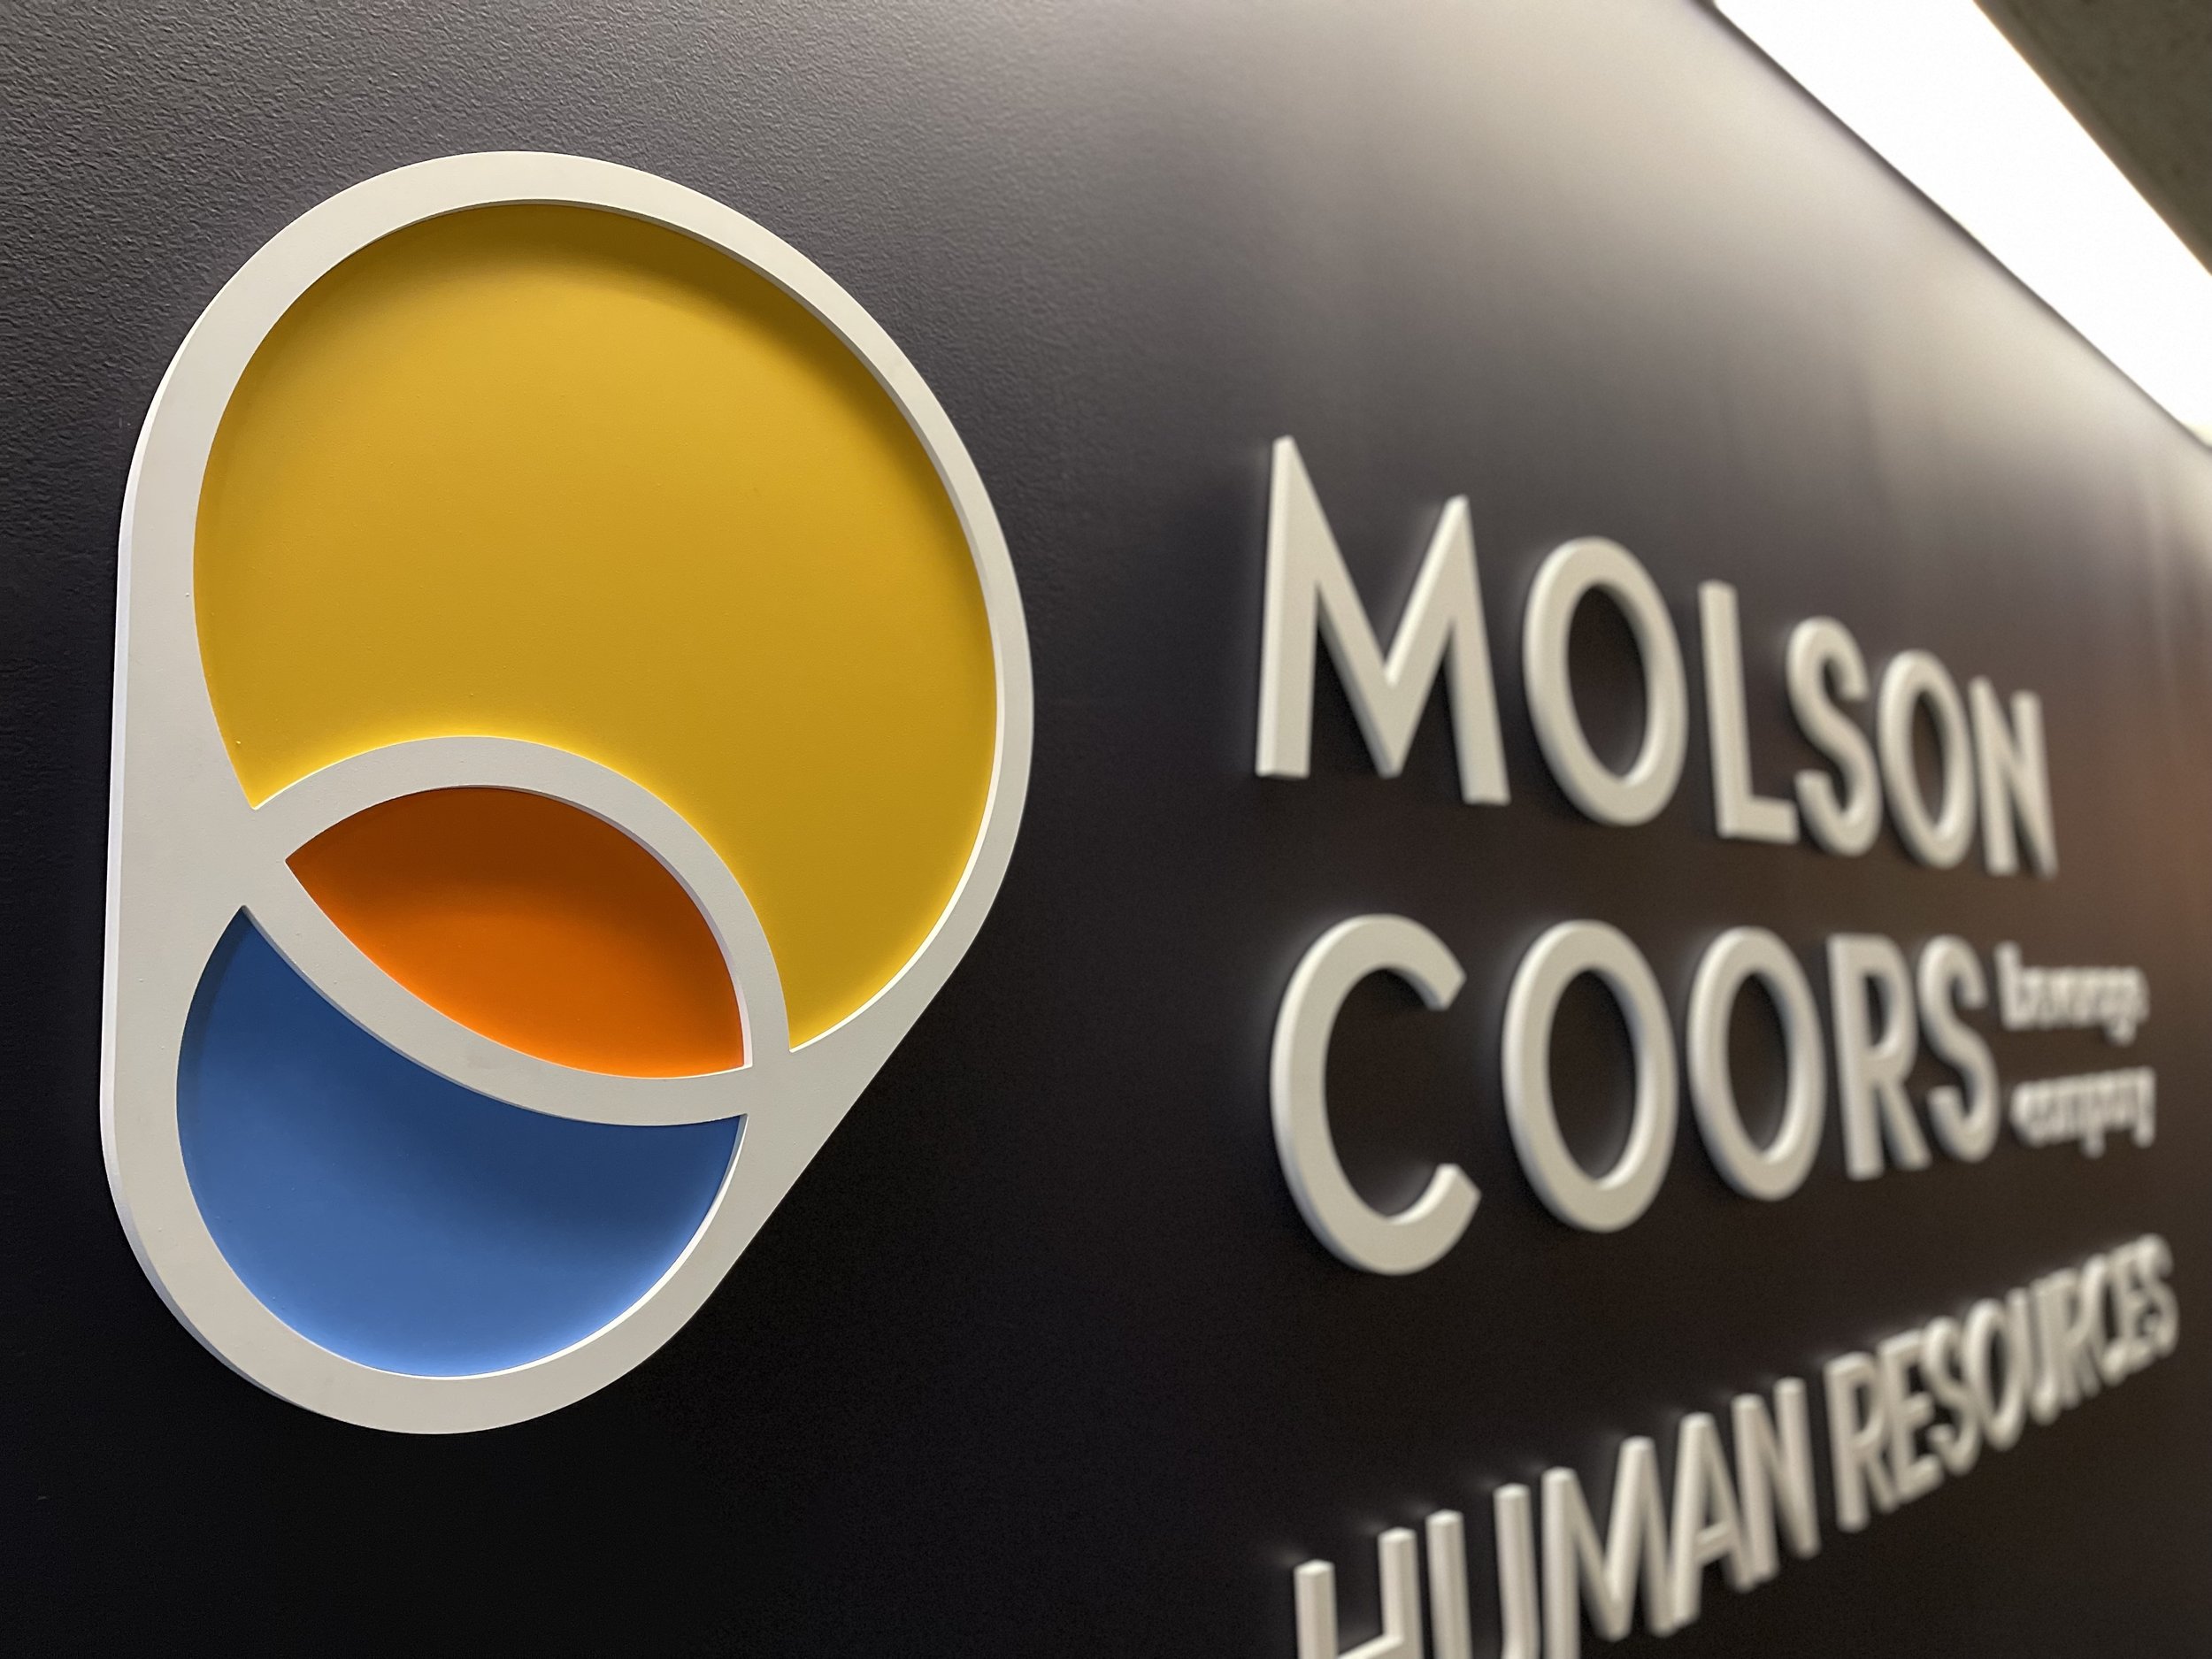 Molson Coors Human Resources Corporate Branding